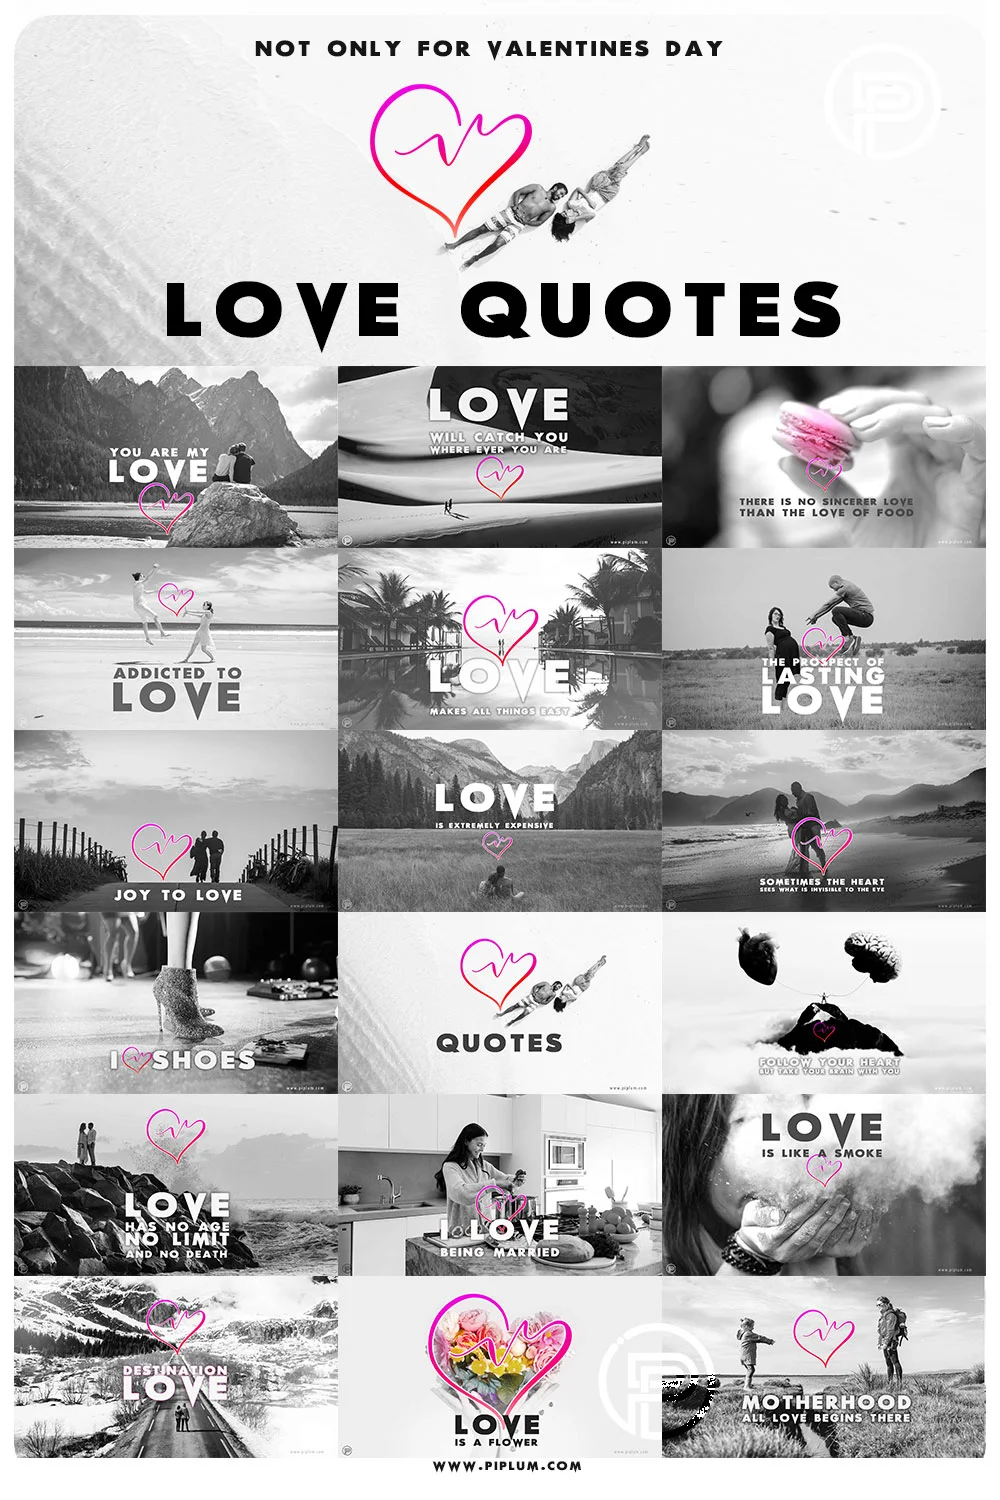 Celebrate Friendship With Super Cute Love Quotes